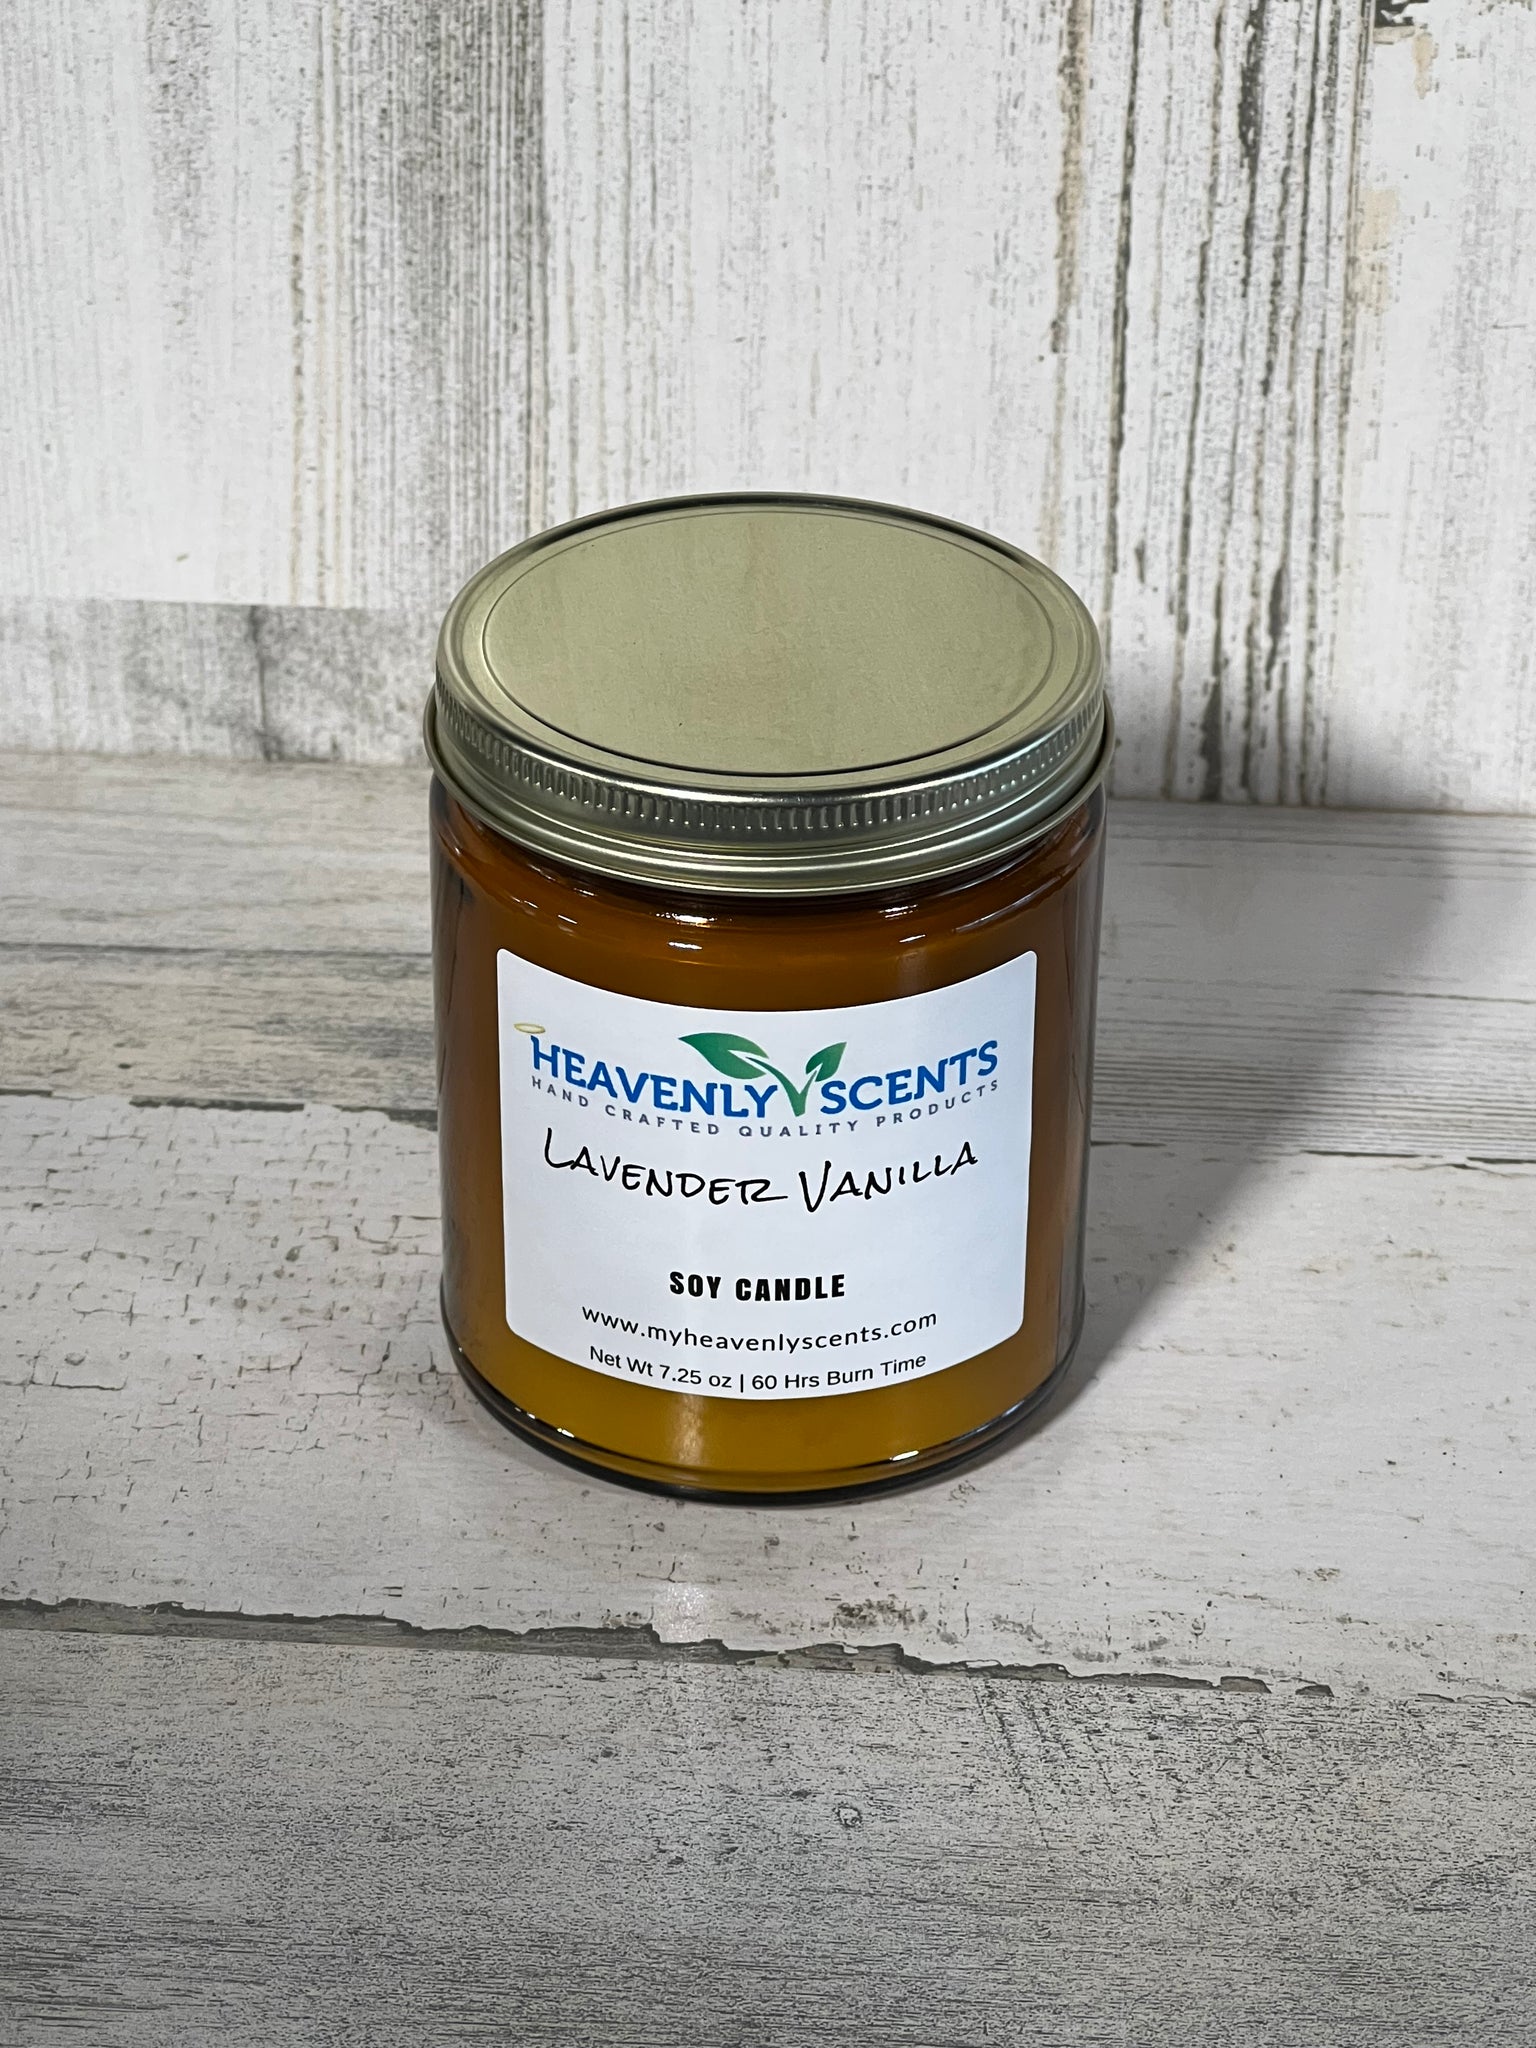 Lavender Vanilla Soy Wax Candle from Heavenly Scents